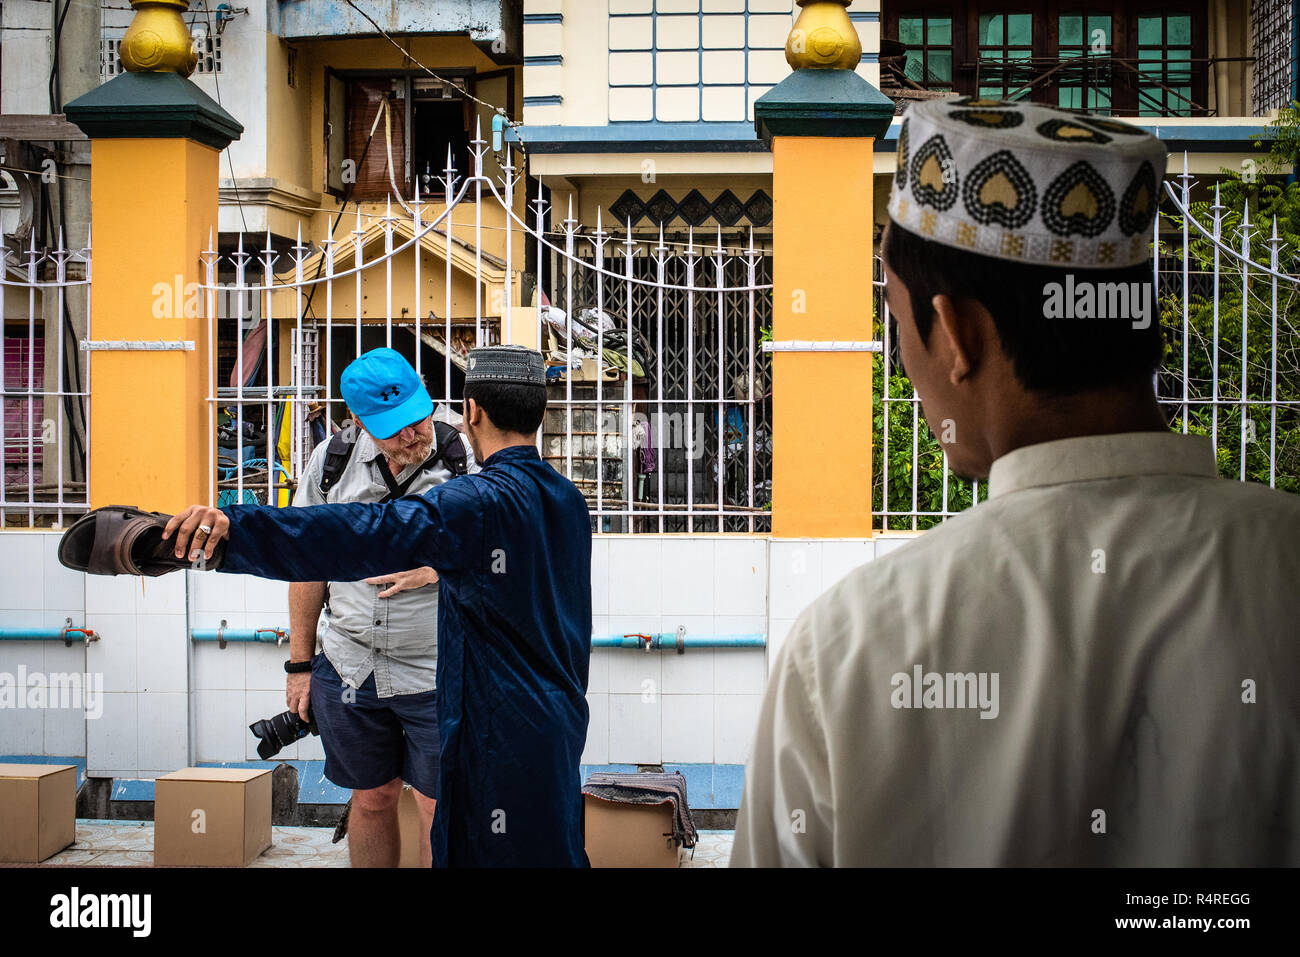 A foreign traveler asking directions at the Joon Mosque, Mandalay, Myanmar Stock Photo